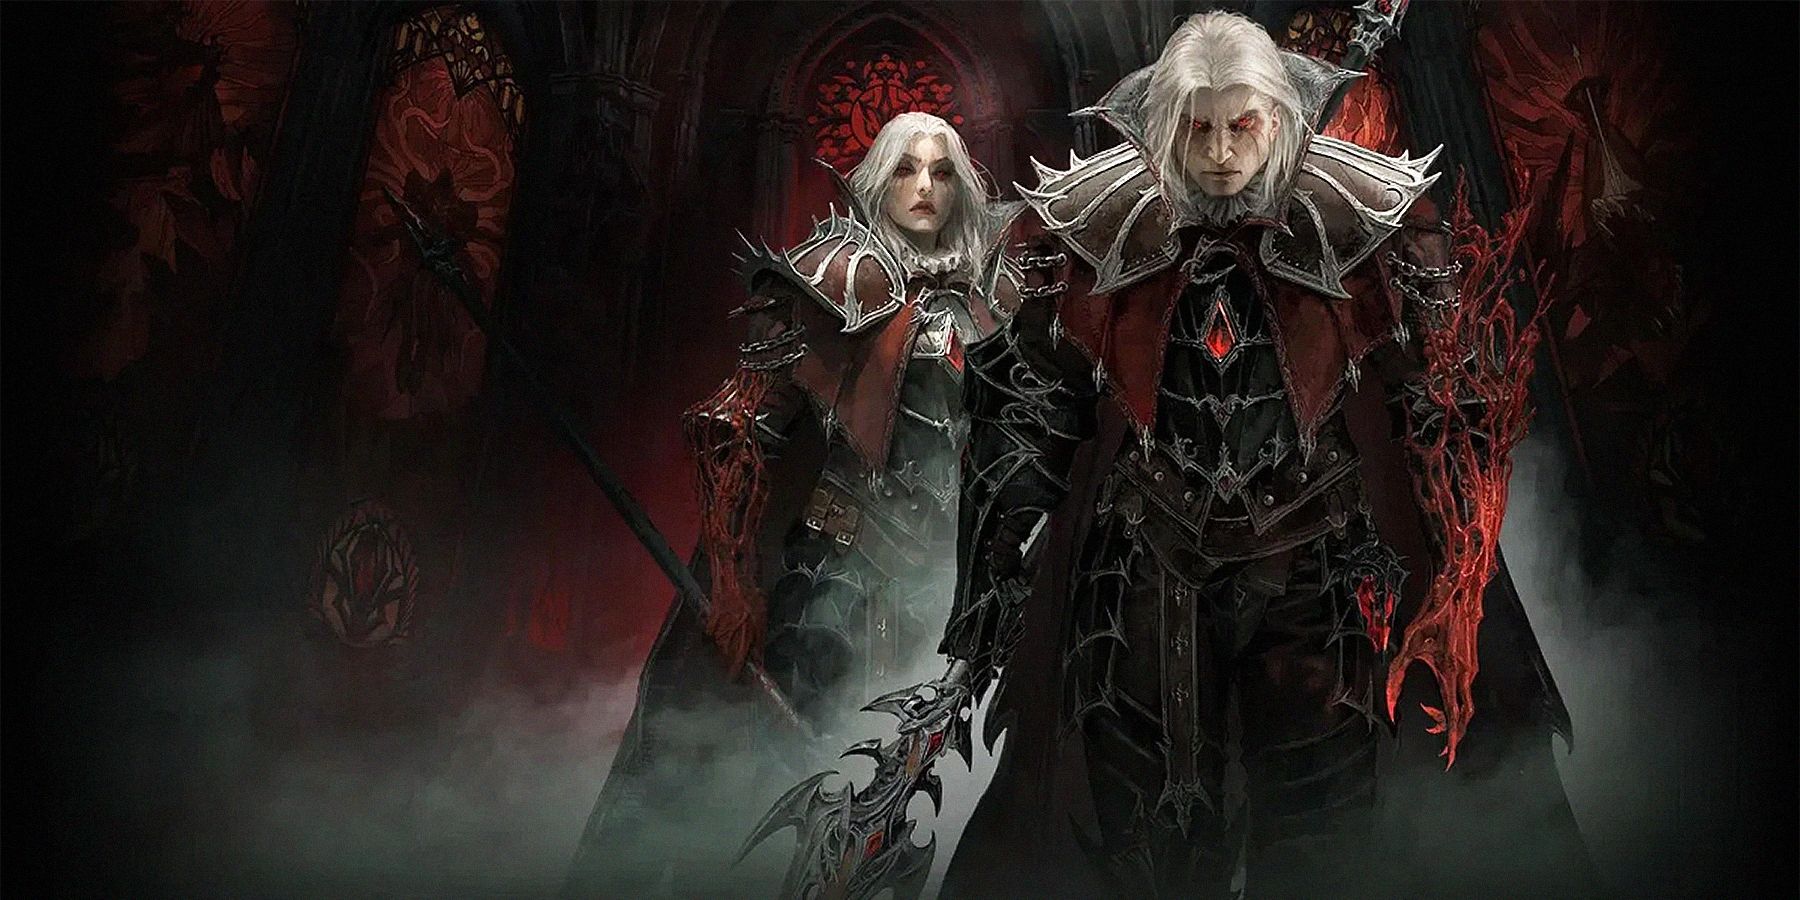 Diablo Immortal unveils the new Blood Knight class arriving on